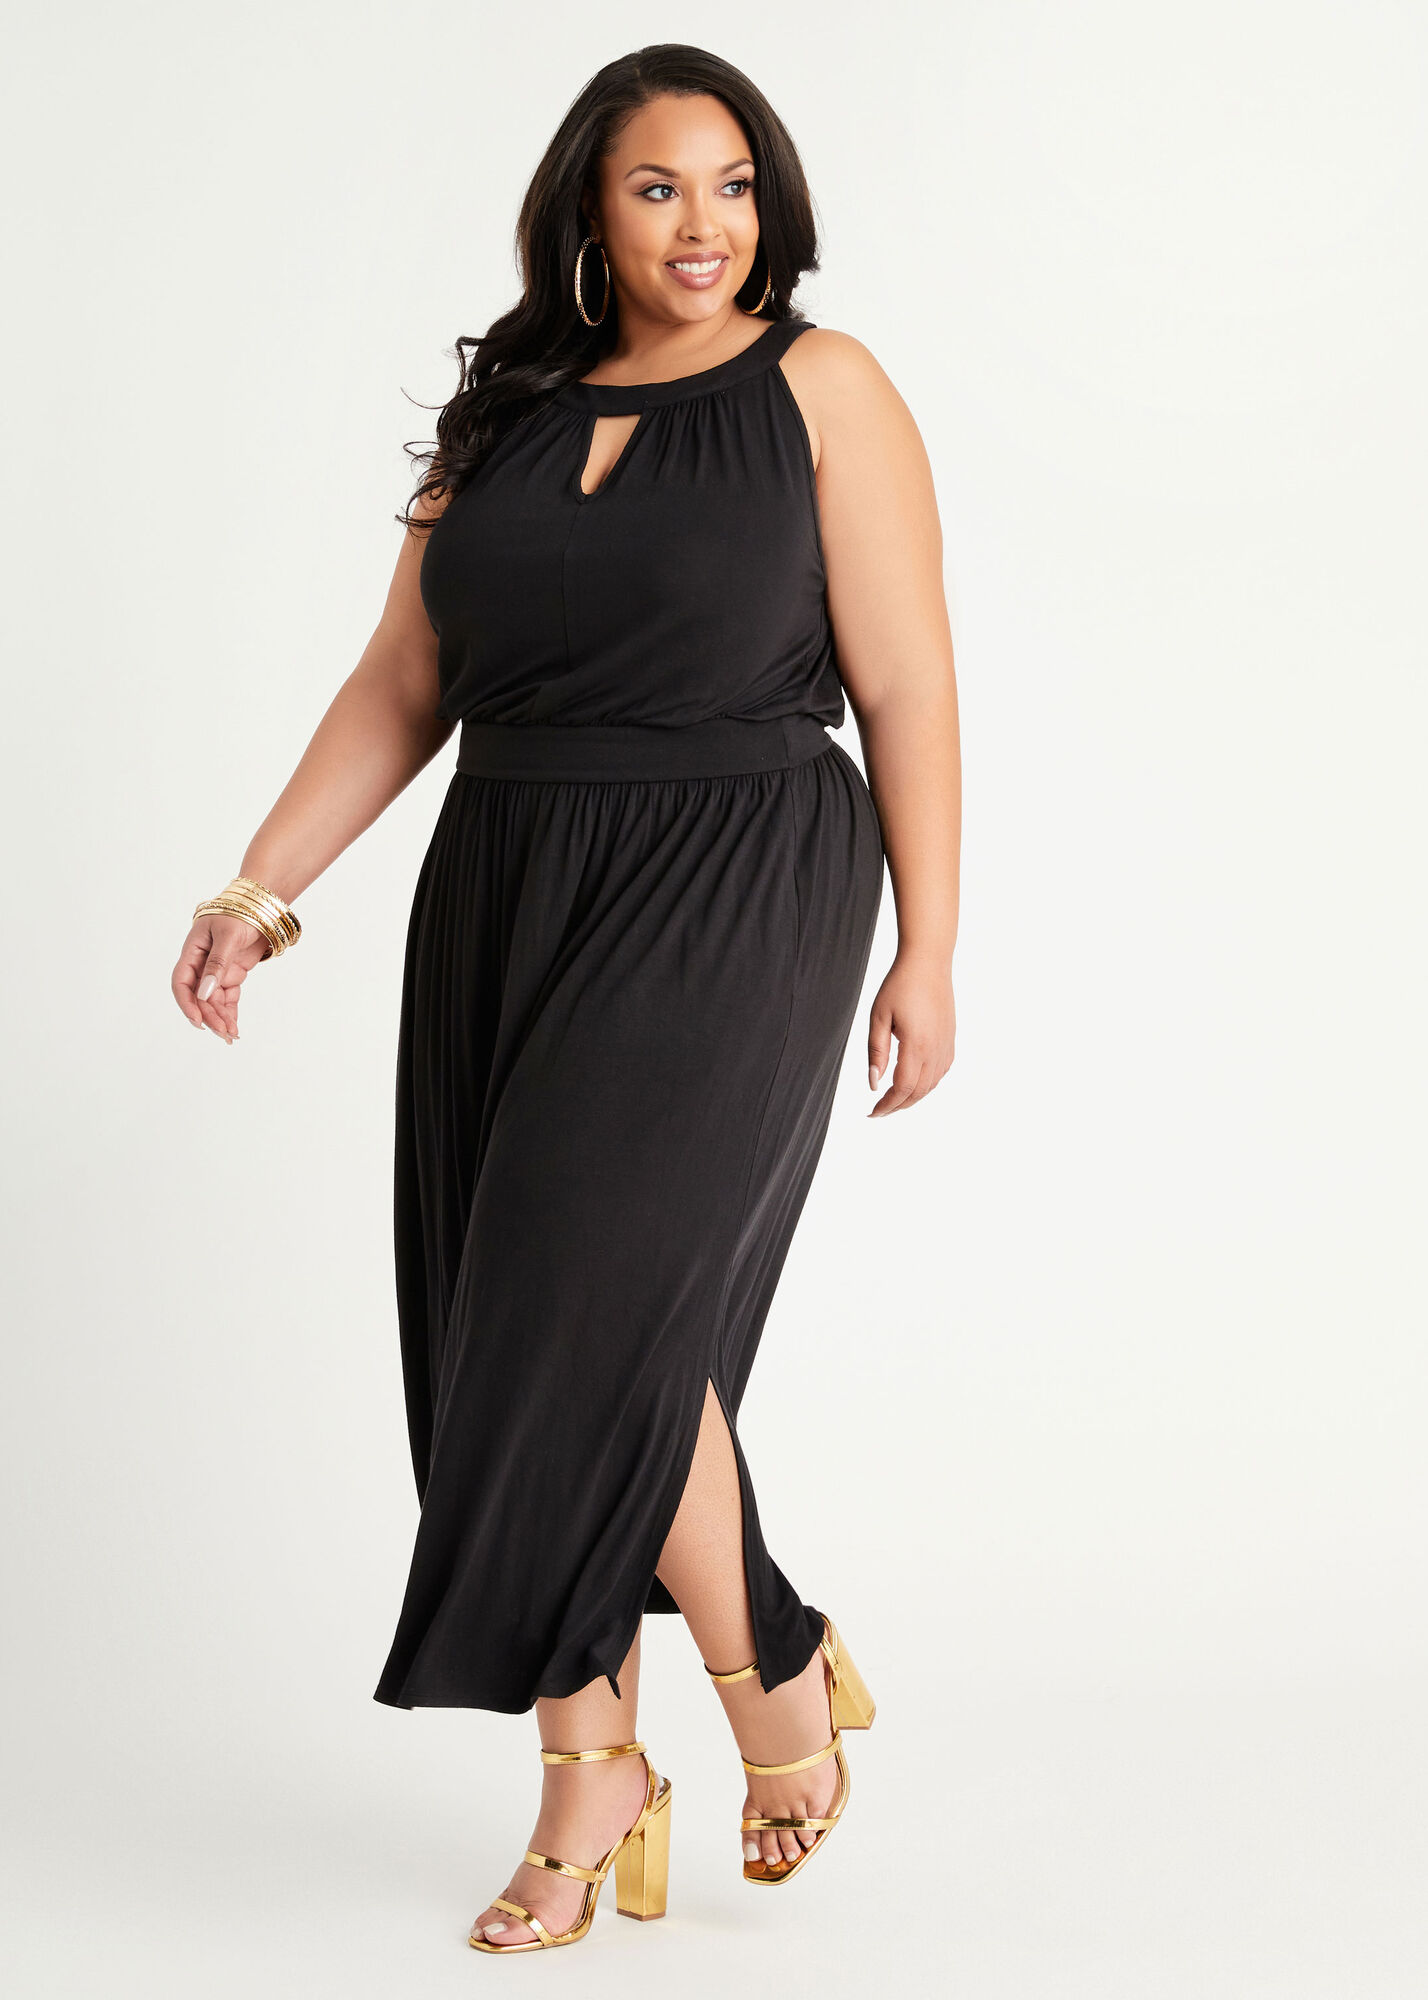 Plus Size Party Dress For Tall Women Plus Size Tall Length Maxi Dress